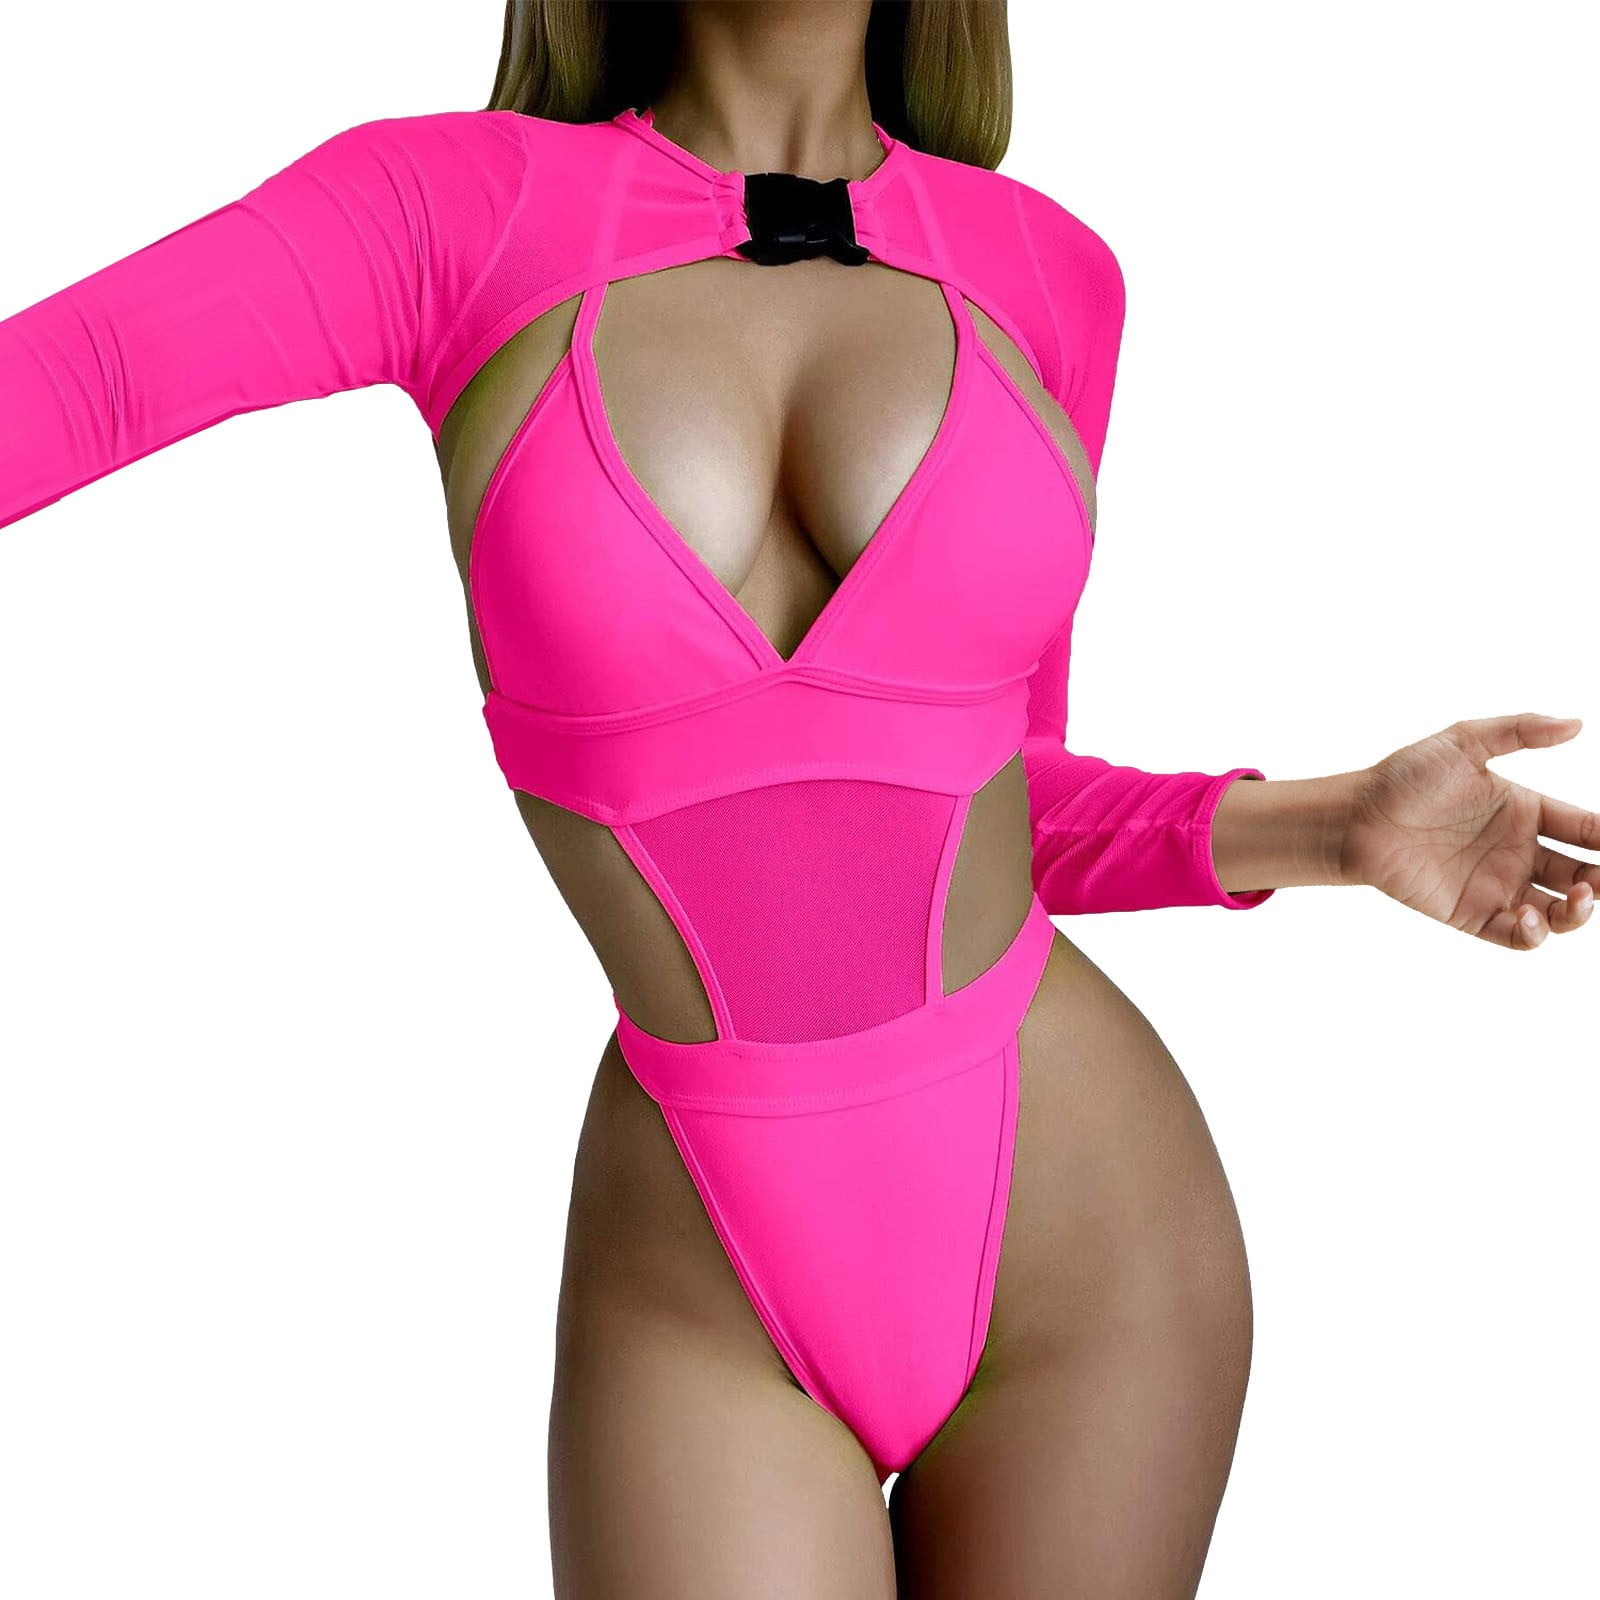 Frehsky lingerie for women 2 Piece Women Rave Outfits Neon